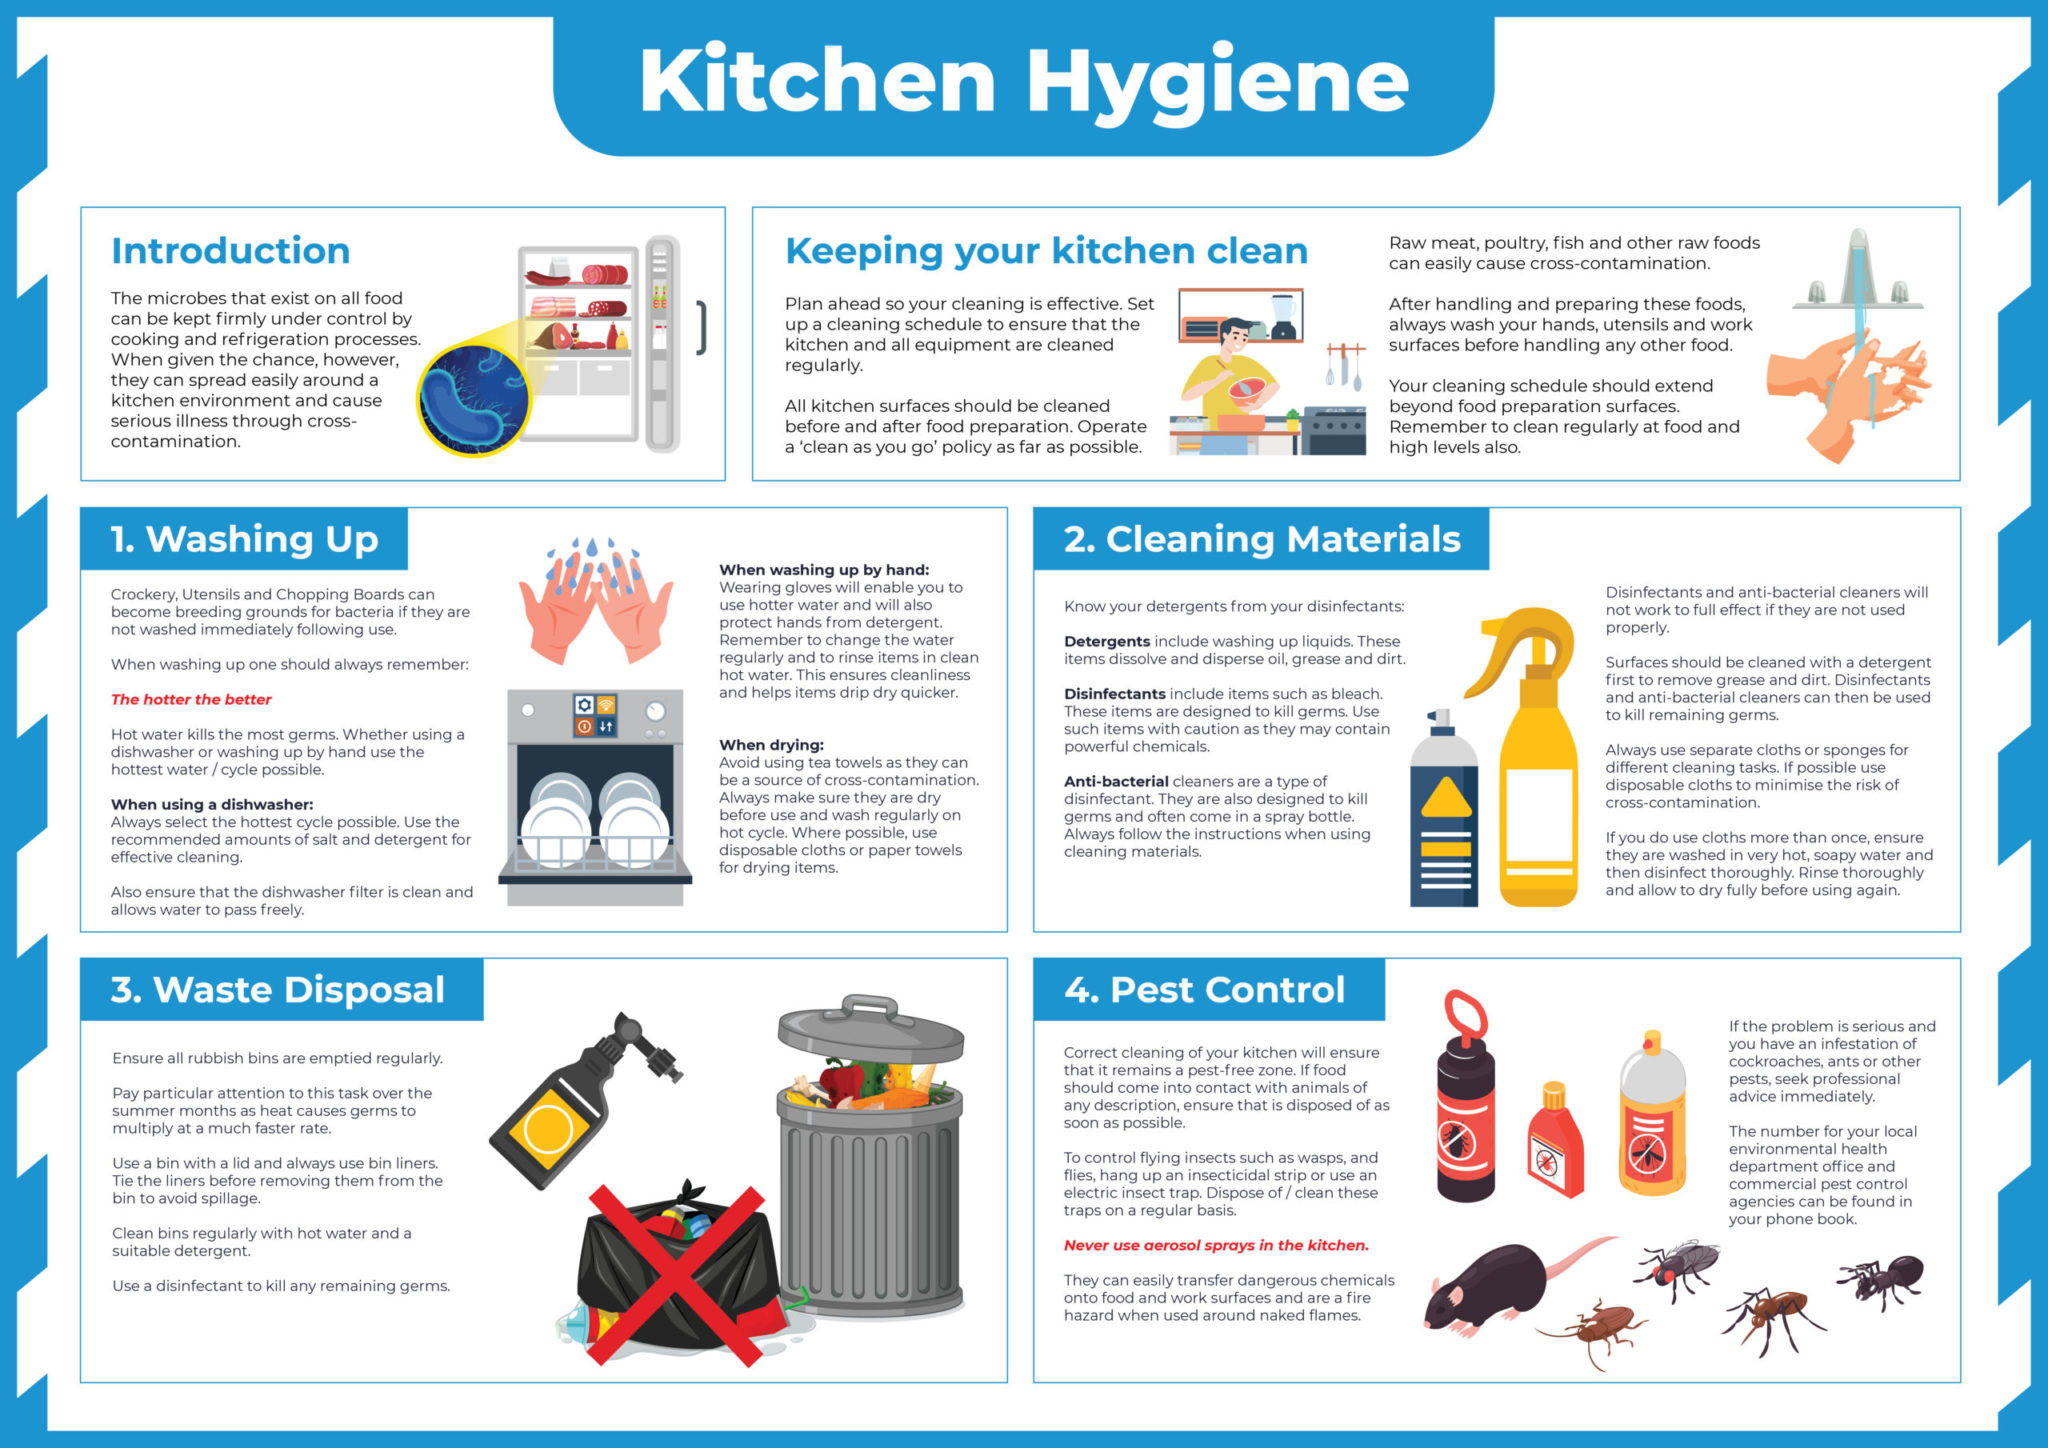 Food Safety Posters Health And Safety Poster Kitchen Safety Tips | My ...